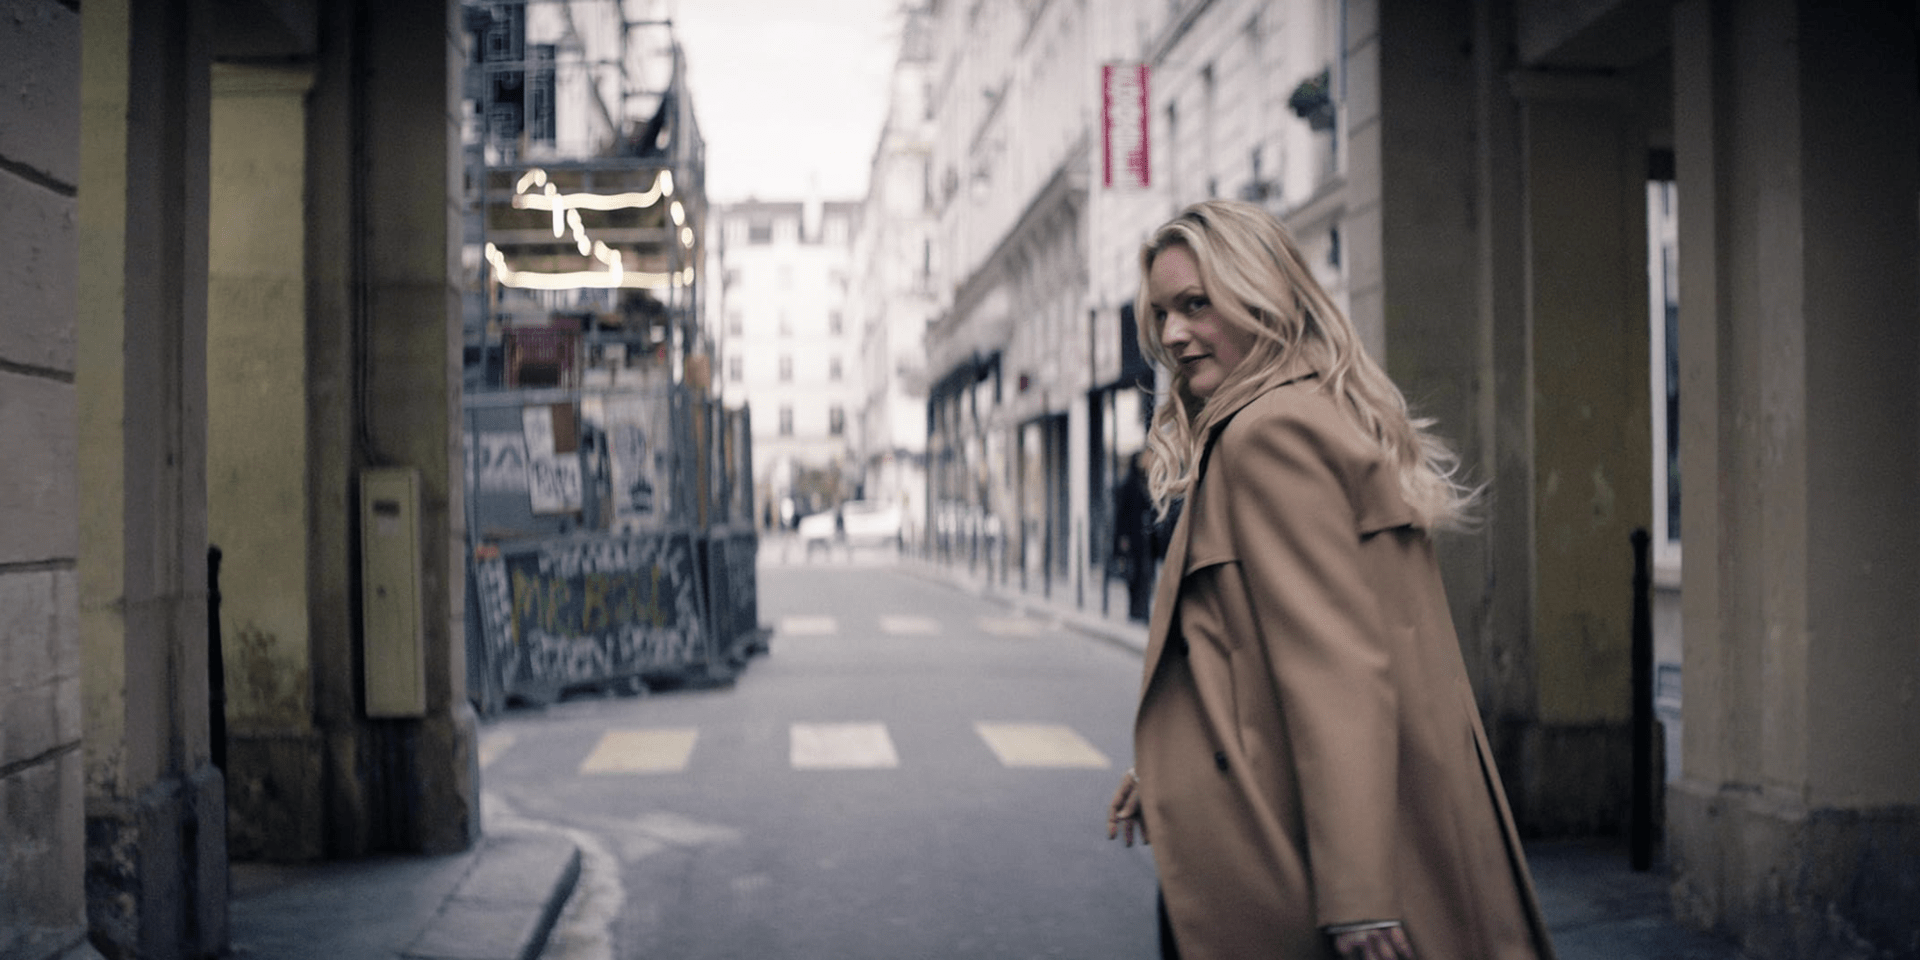 A woman in a trench coat looks over her shoulder while walking down an empty street in this image from Love & Squalor Pictures.